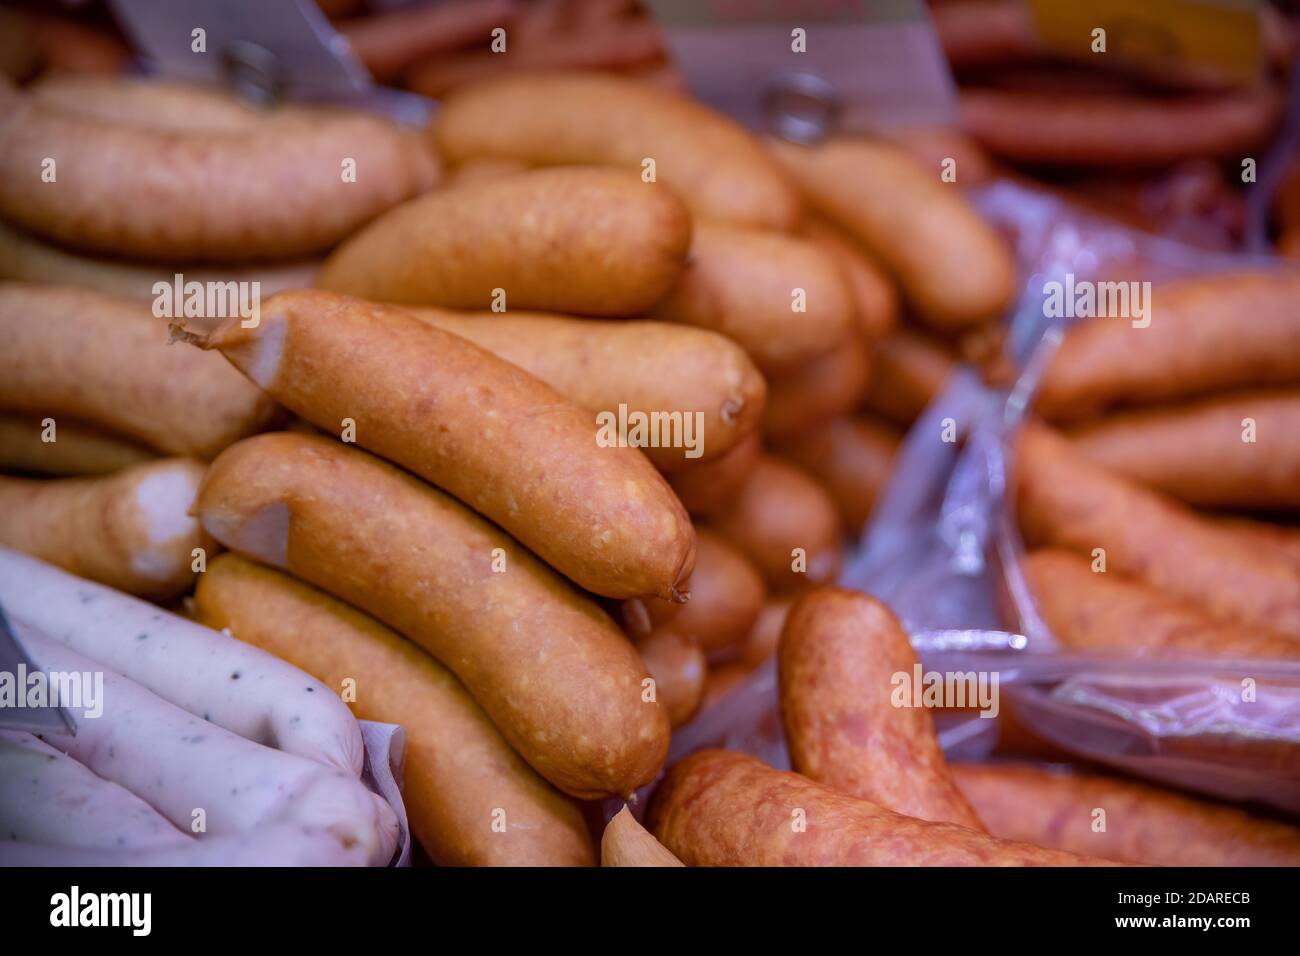 Sausages at a stand in a butcher's shop. Stock Photo